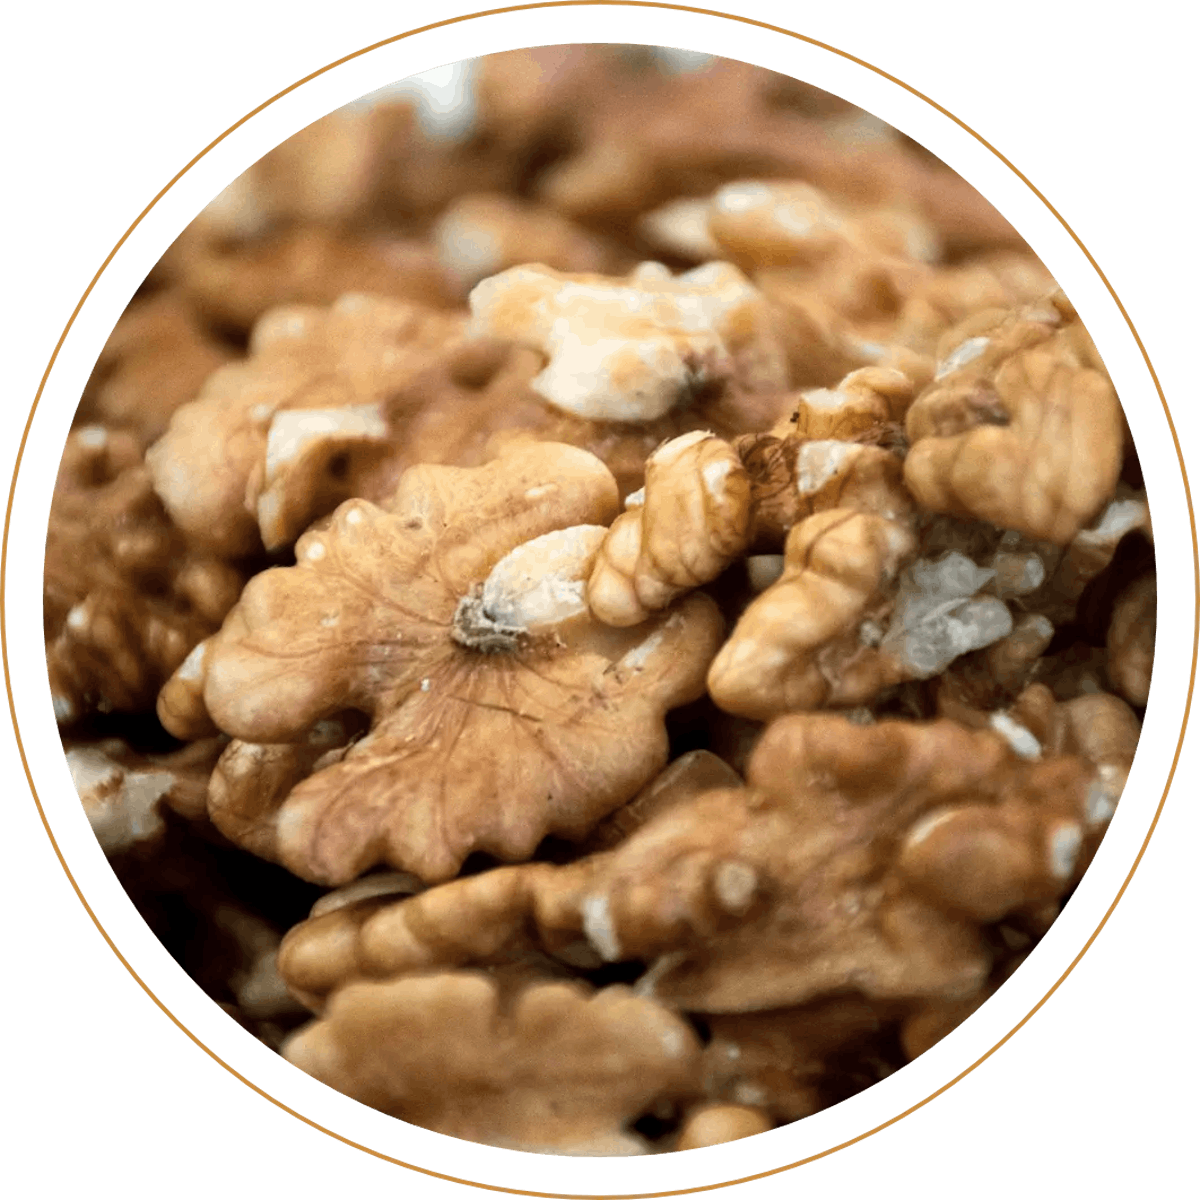 Things to Consider Before Buying Bulk Nuts